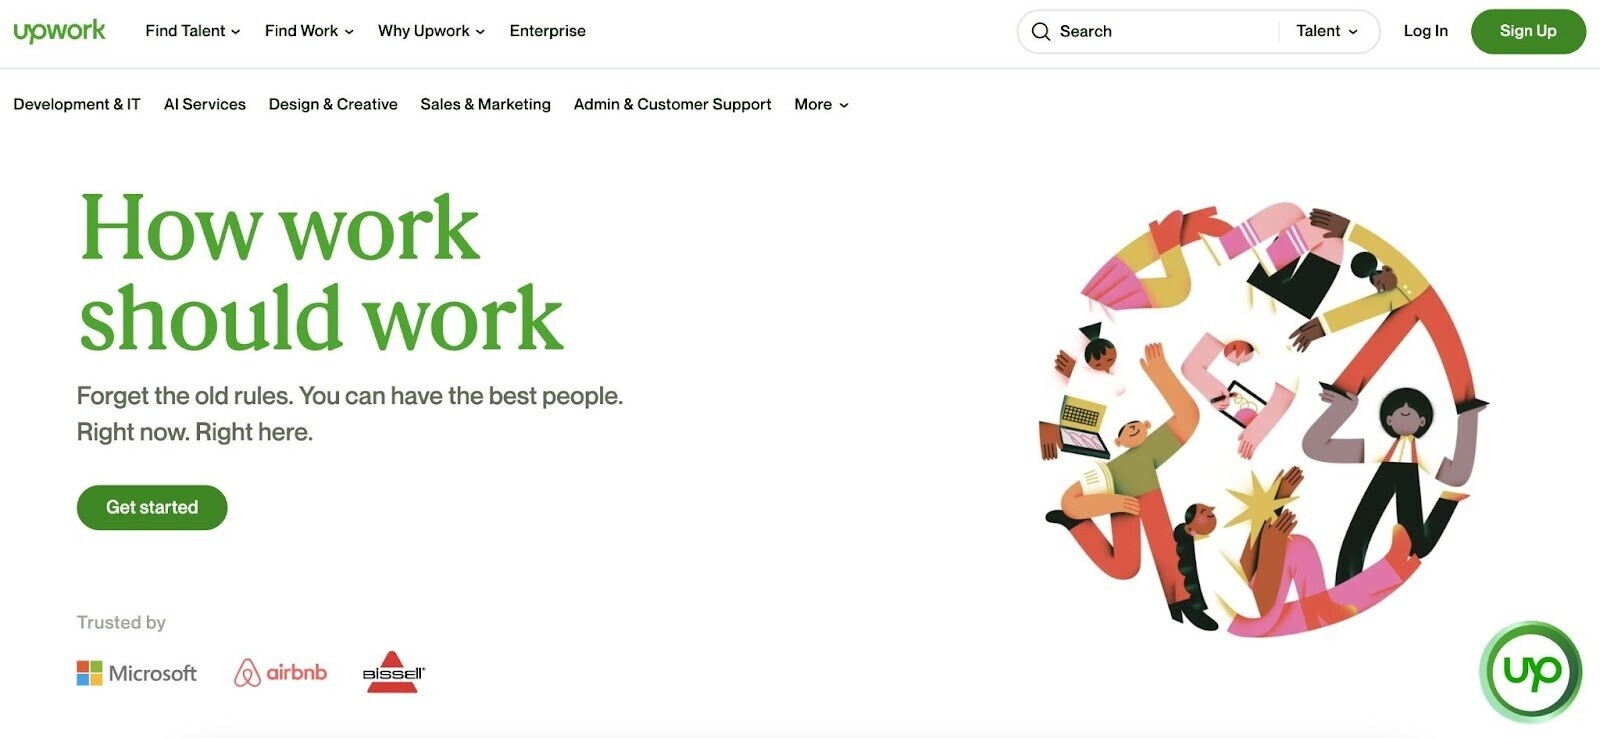 Upwork homepage with title "How work should work"